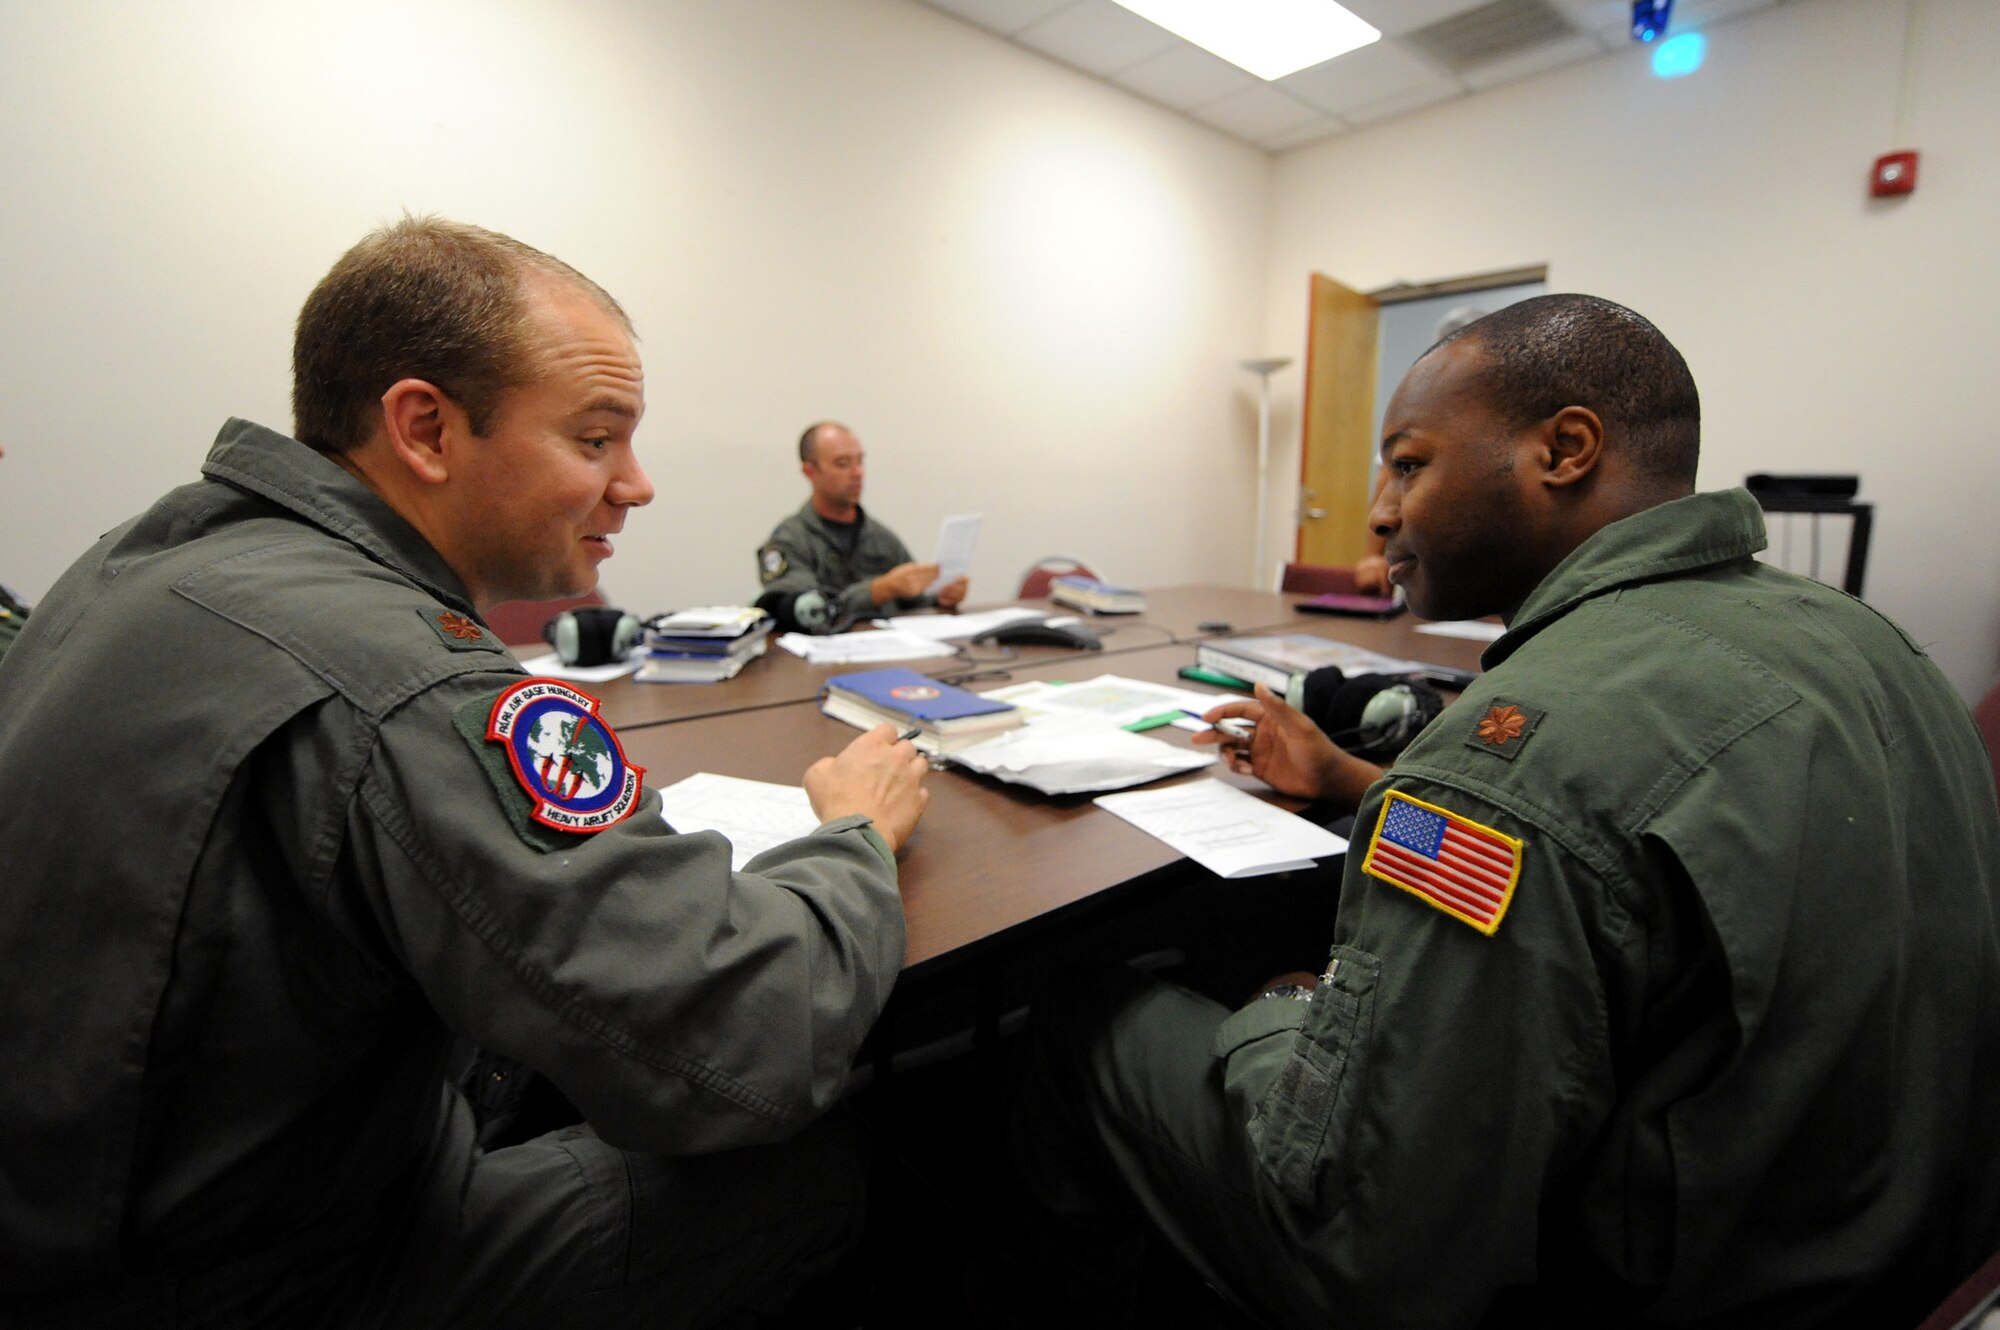 Maj. Brian Nicosia discusses details on flight plans with Maj. Patrick Brady-Lee prior to flying in the C-17 Globemaster III simulator June 21, 2010, on Joint Base Charleston, S.C. Major Nicosia is the chief of tactics with the Heavy Airlift Wing at Papa Air Base, Hungary, and is visiting Joint Base Charleston for quarterly pilot training. (U.S. Air Force photo/James M. Bowman)